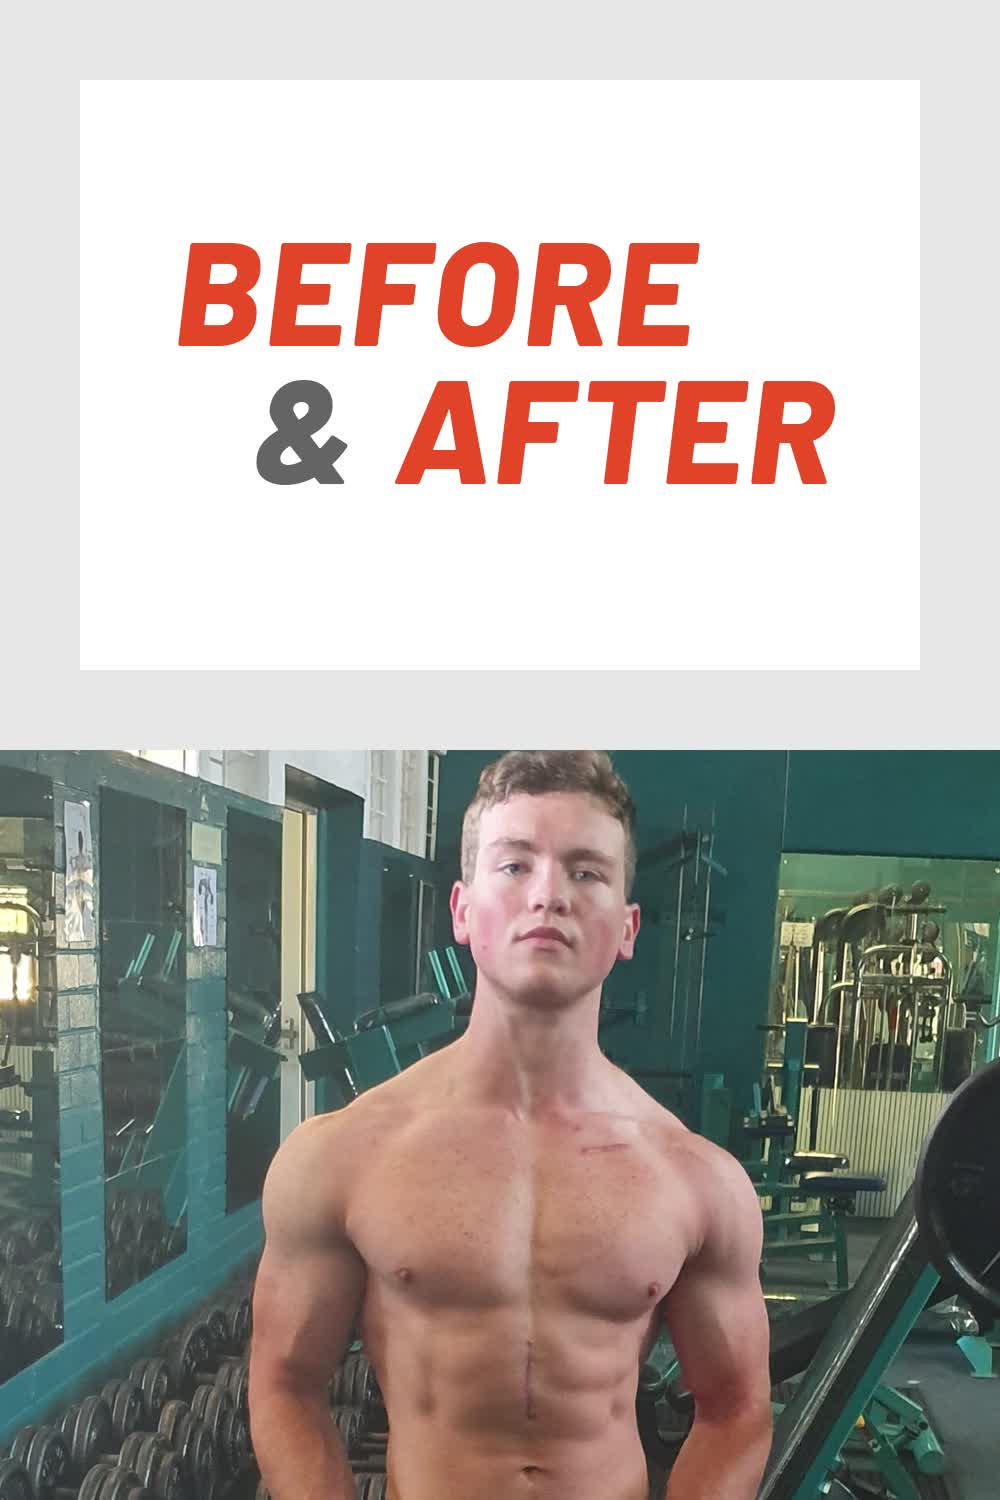 How This David Laid Workout Can Shred & Tone Your Physique